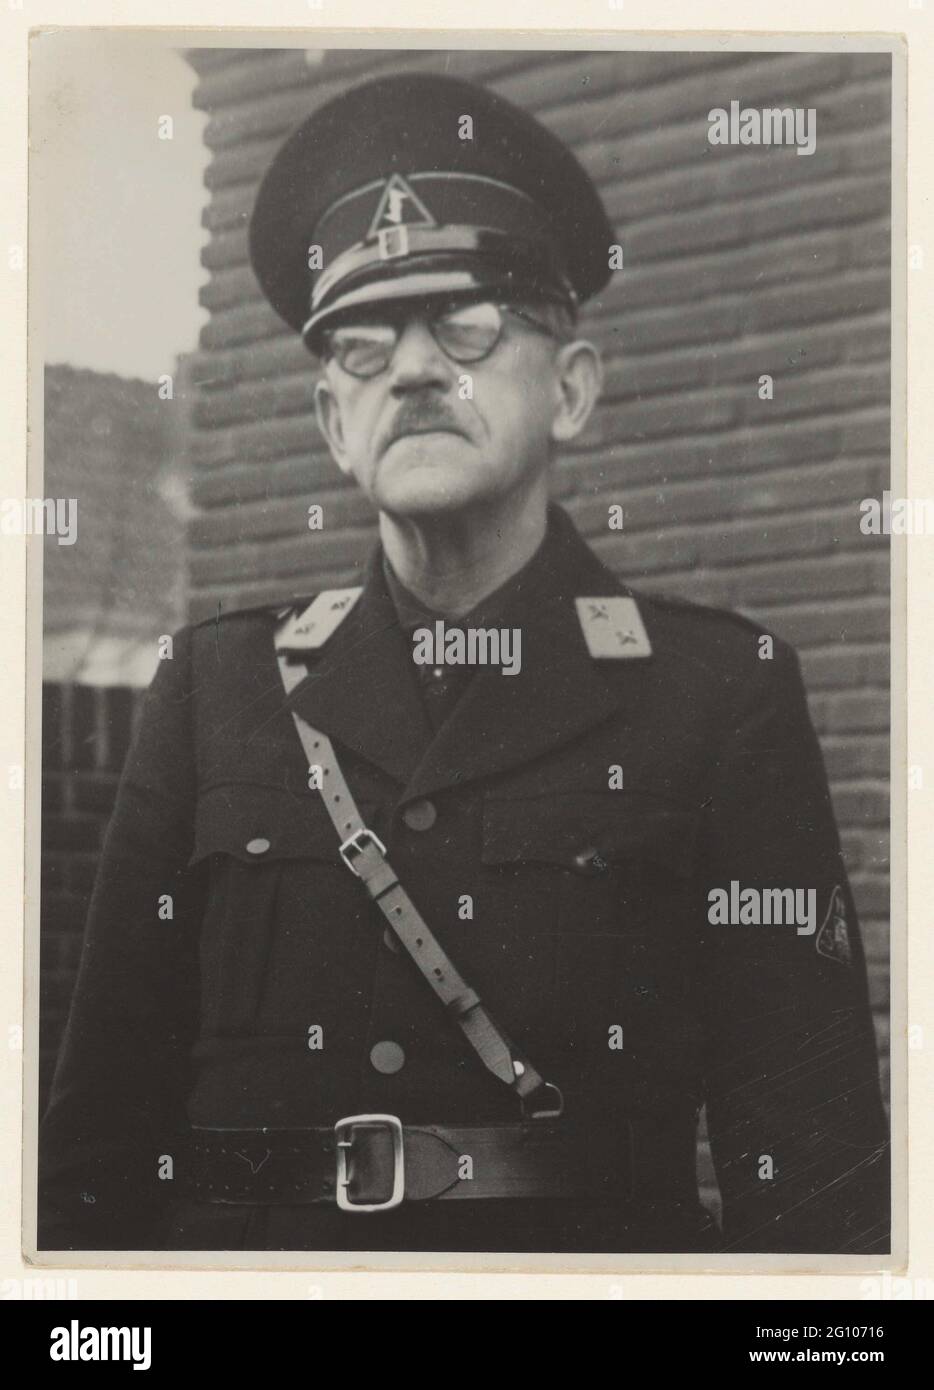 Portrait of a member of the WA; NSB. Portrait of a member of the WA. Photographed from the waist, standing in front of a house. On his collar a distinctive with two stars: companion, the lower frame. Hat with the Wolfsangel, on his left sleeve. The triangular emblem of the NSB. Belt diagonally over the chest. It is an older man with glasses and mustache. This concerns the same man as at NG-2007-35-206, so it would be a member of the country guard, founded at the end of 1943. Stock Photo